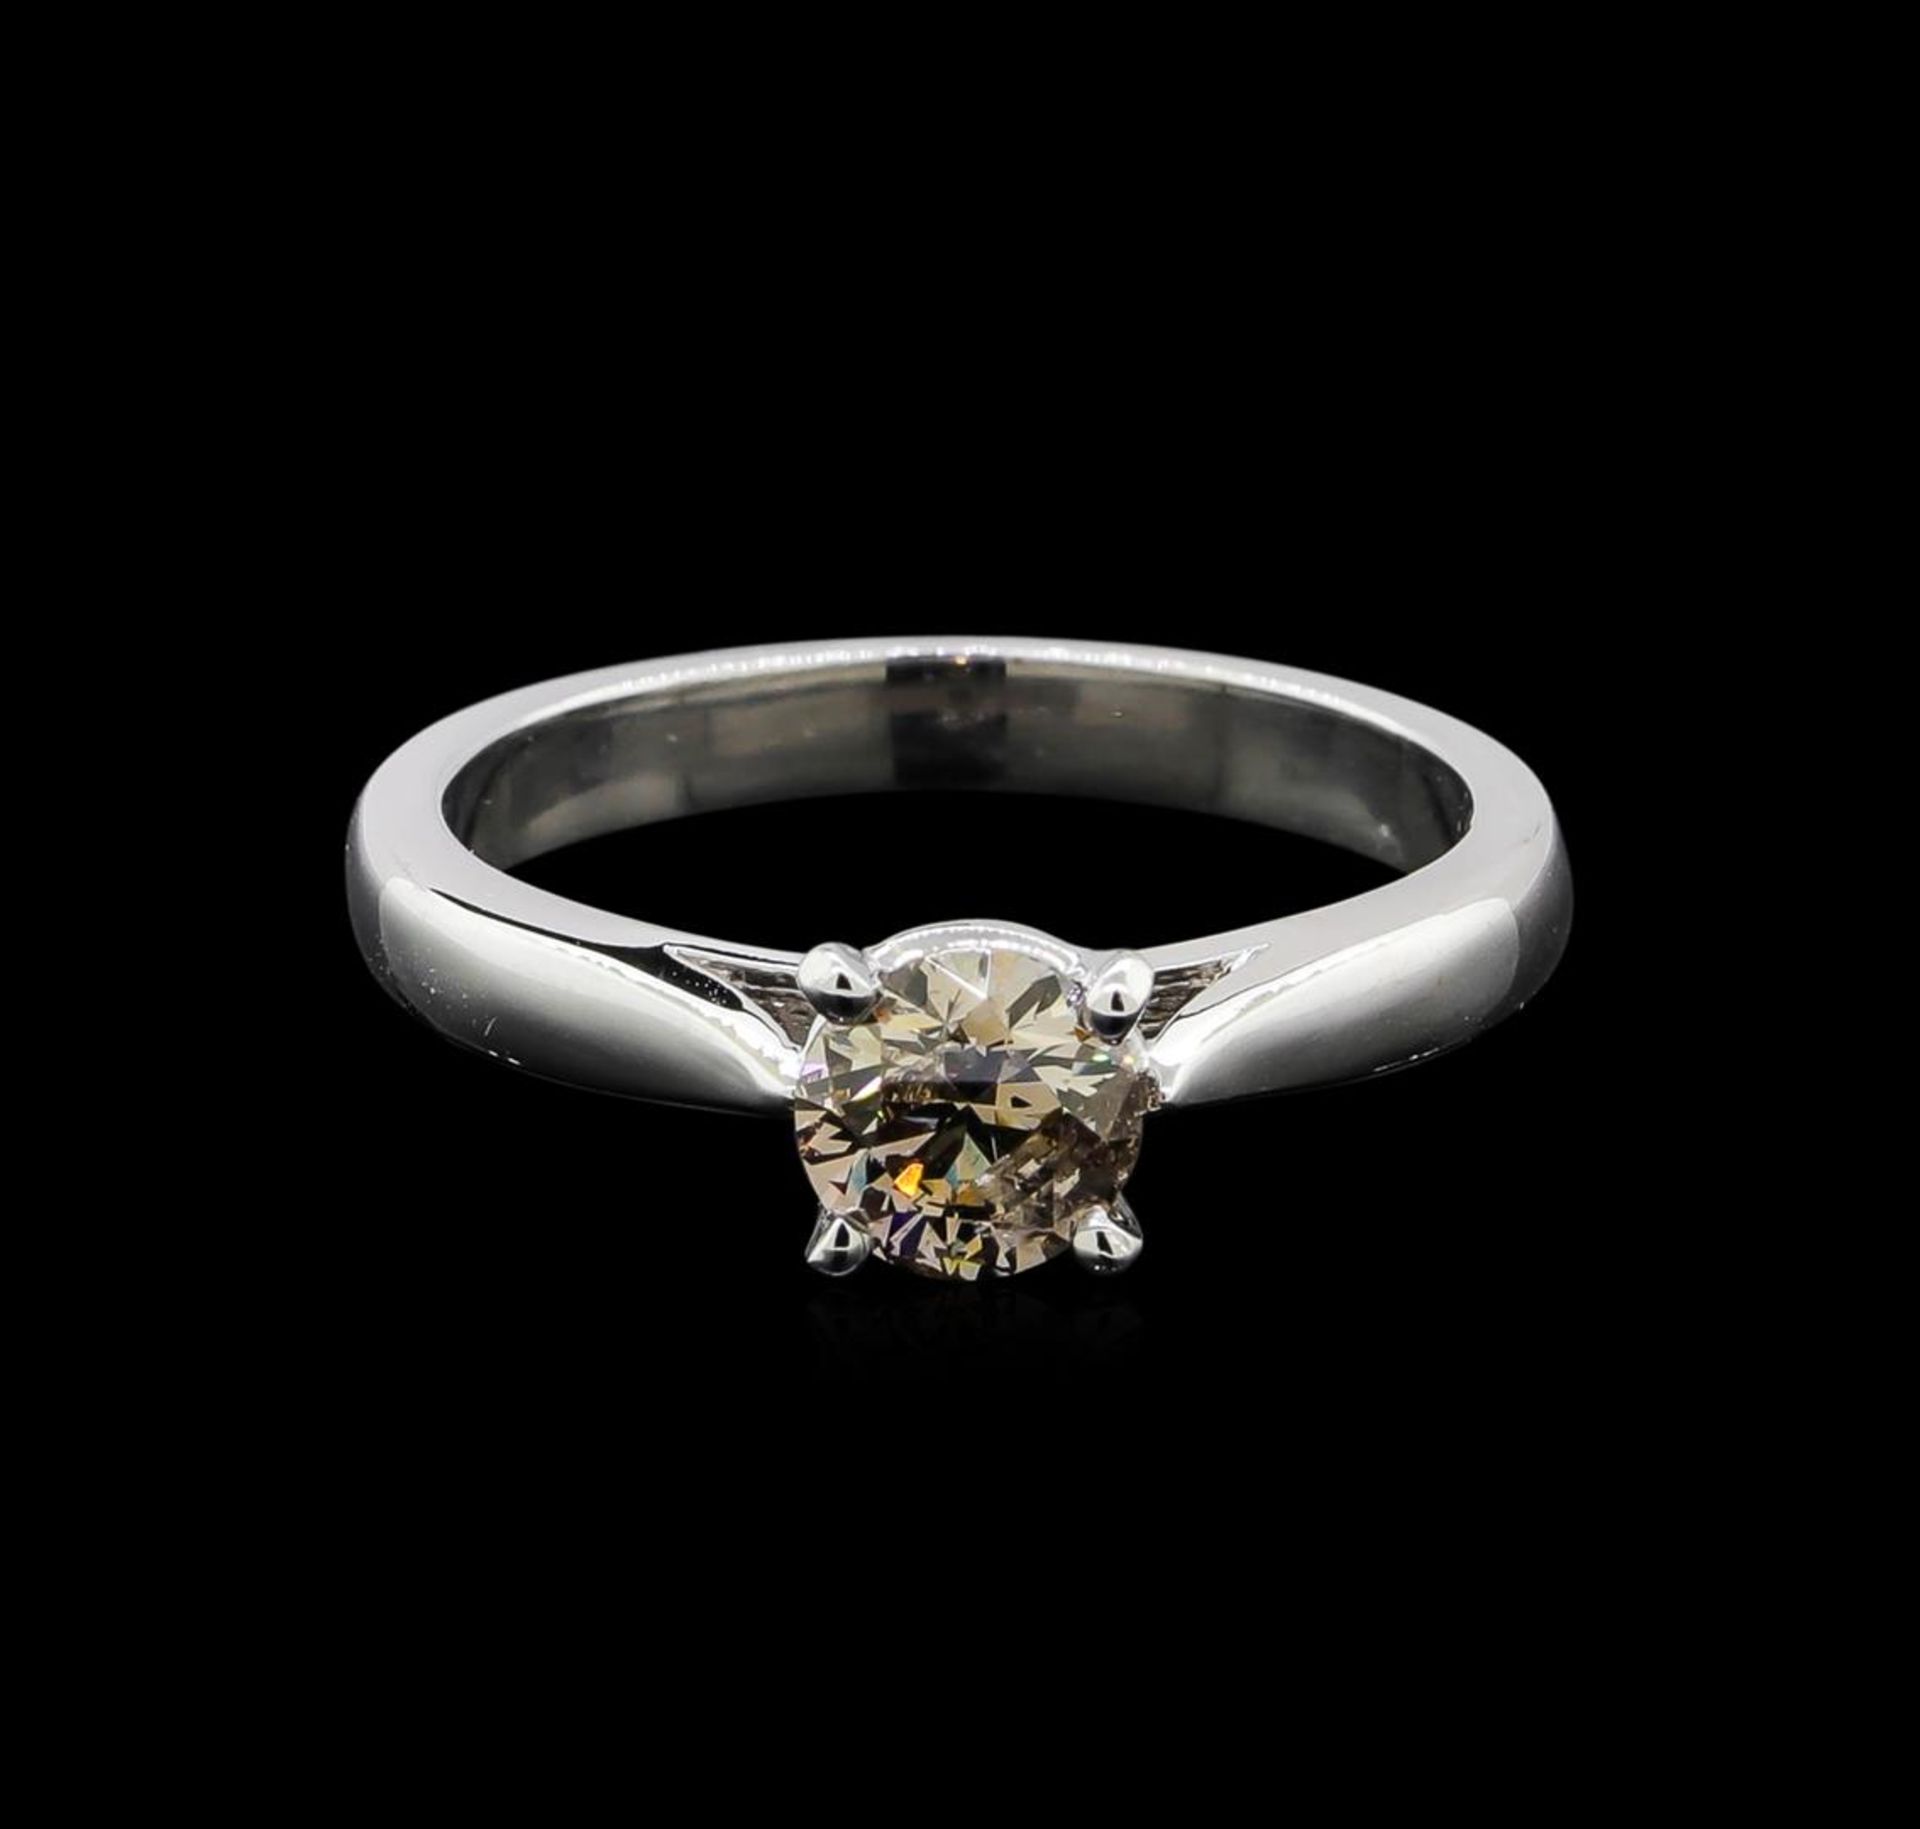 14KT White Gold 0.70 ctw Round Cut Fancy Brown Diamond Solitaire Ring - Image 2 of 5